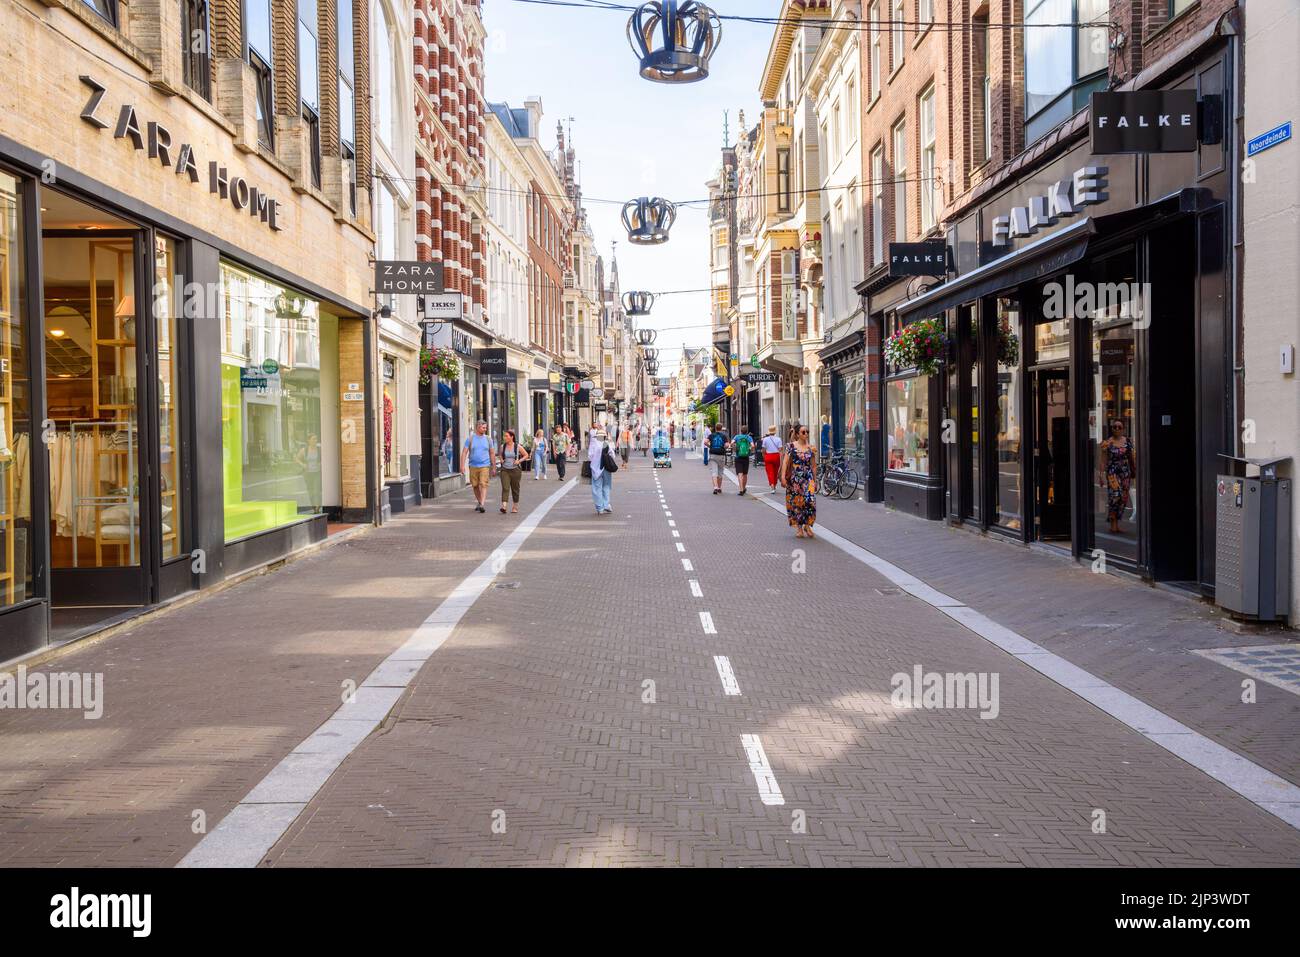 The Hague, Netherlands - June 17, 2022: People stolling along Noordeinde street on a sunny day Stock Photo